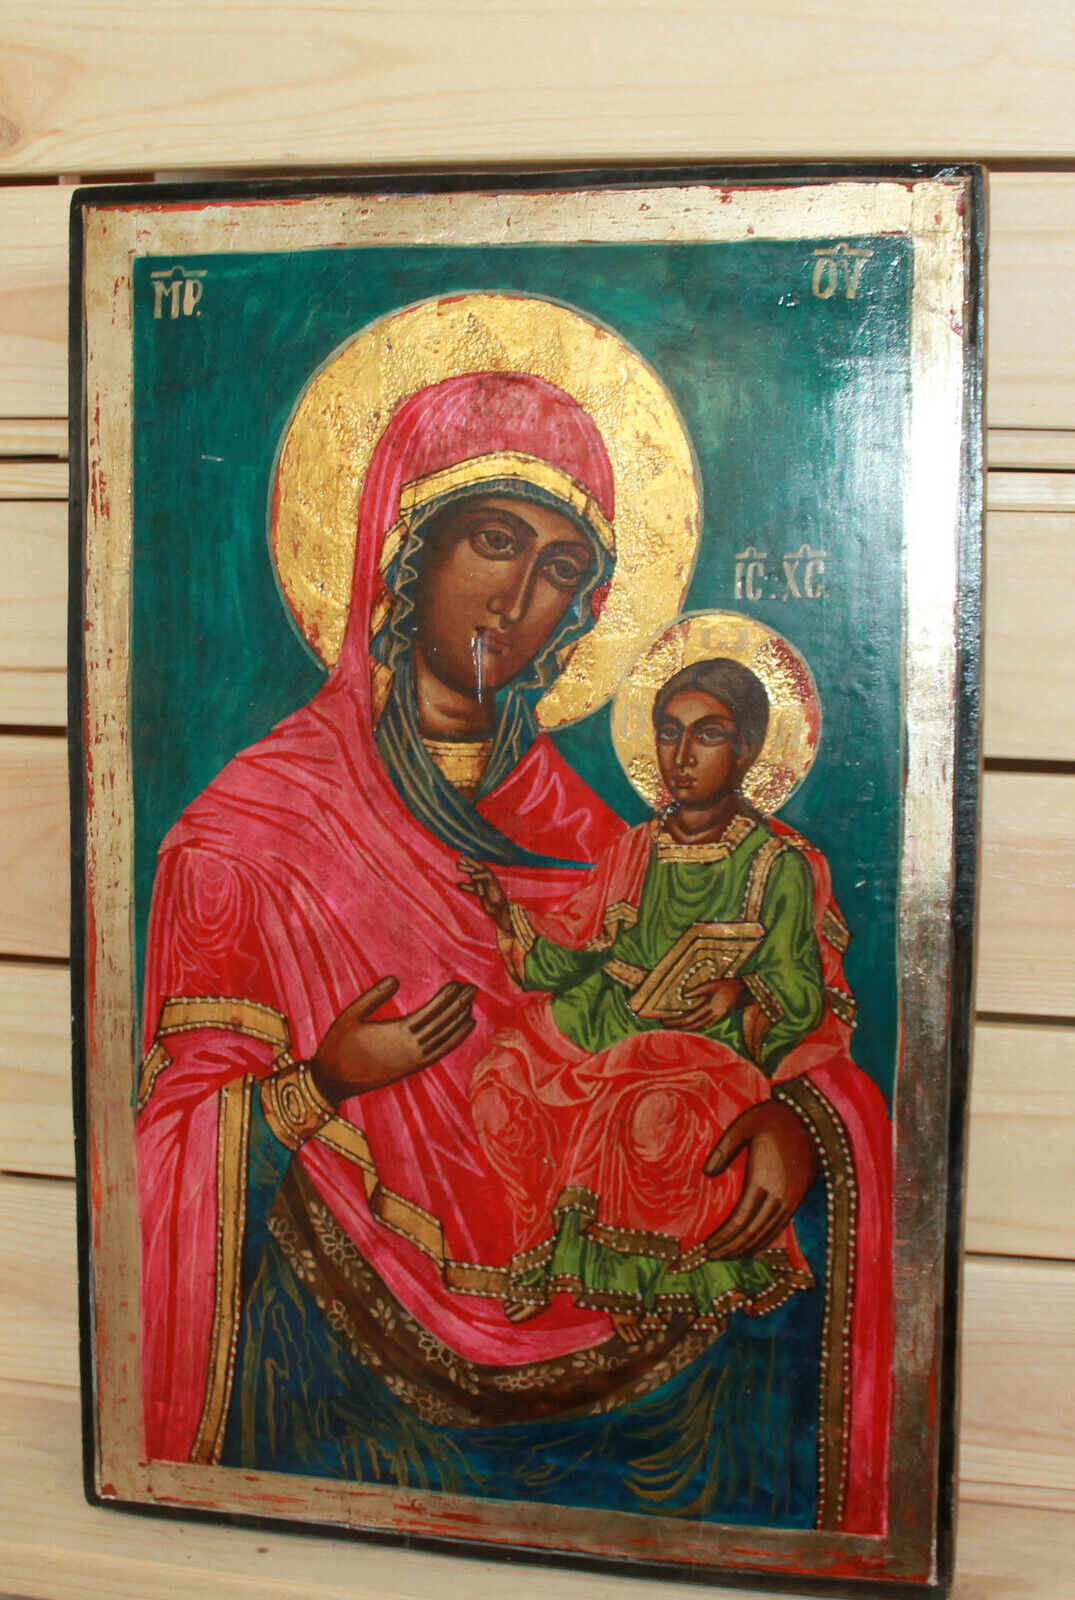 Vintage religious hand painted icon Jesus Christ Child Virgin Mary